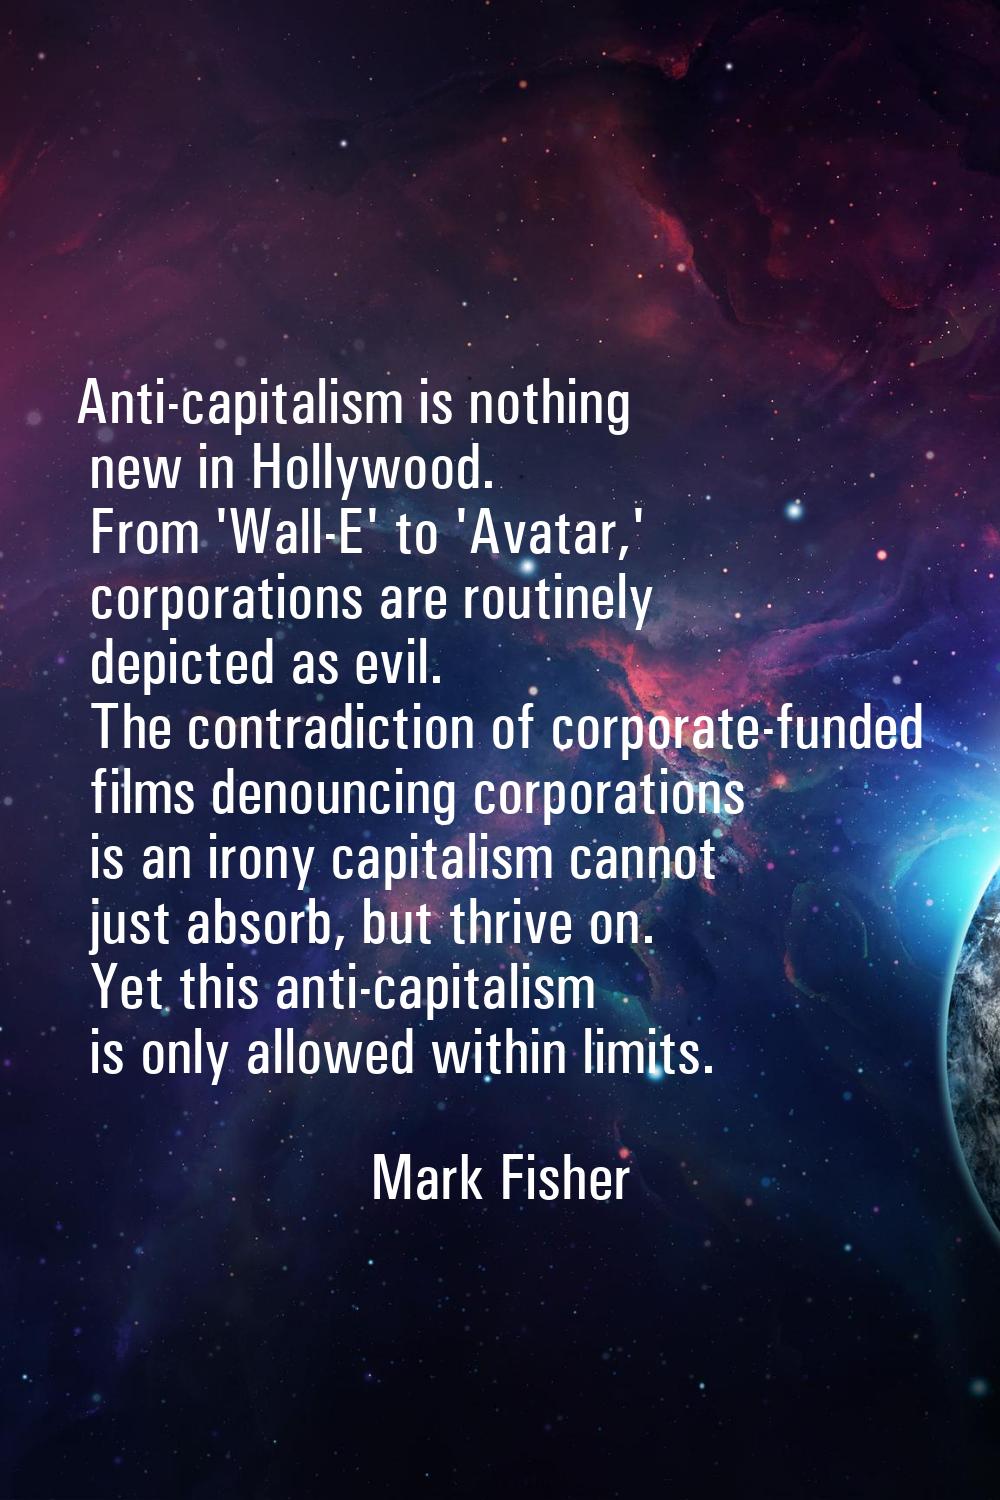 Anti-capitalism is nothing new in Hollywood. From 'Wall-E' to 'Avatar,' corporations are routinely 